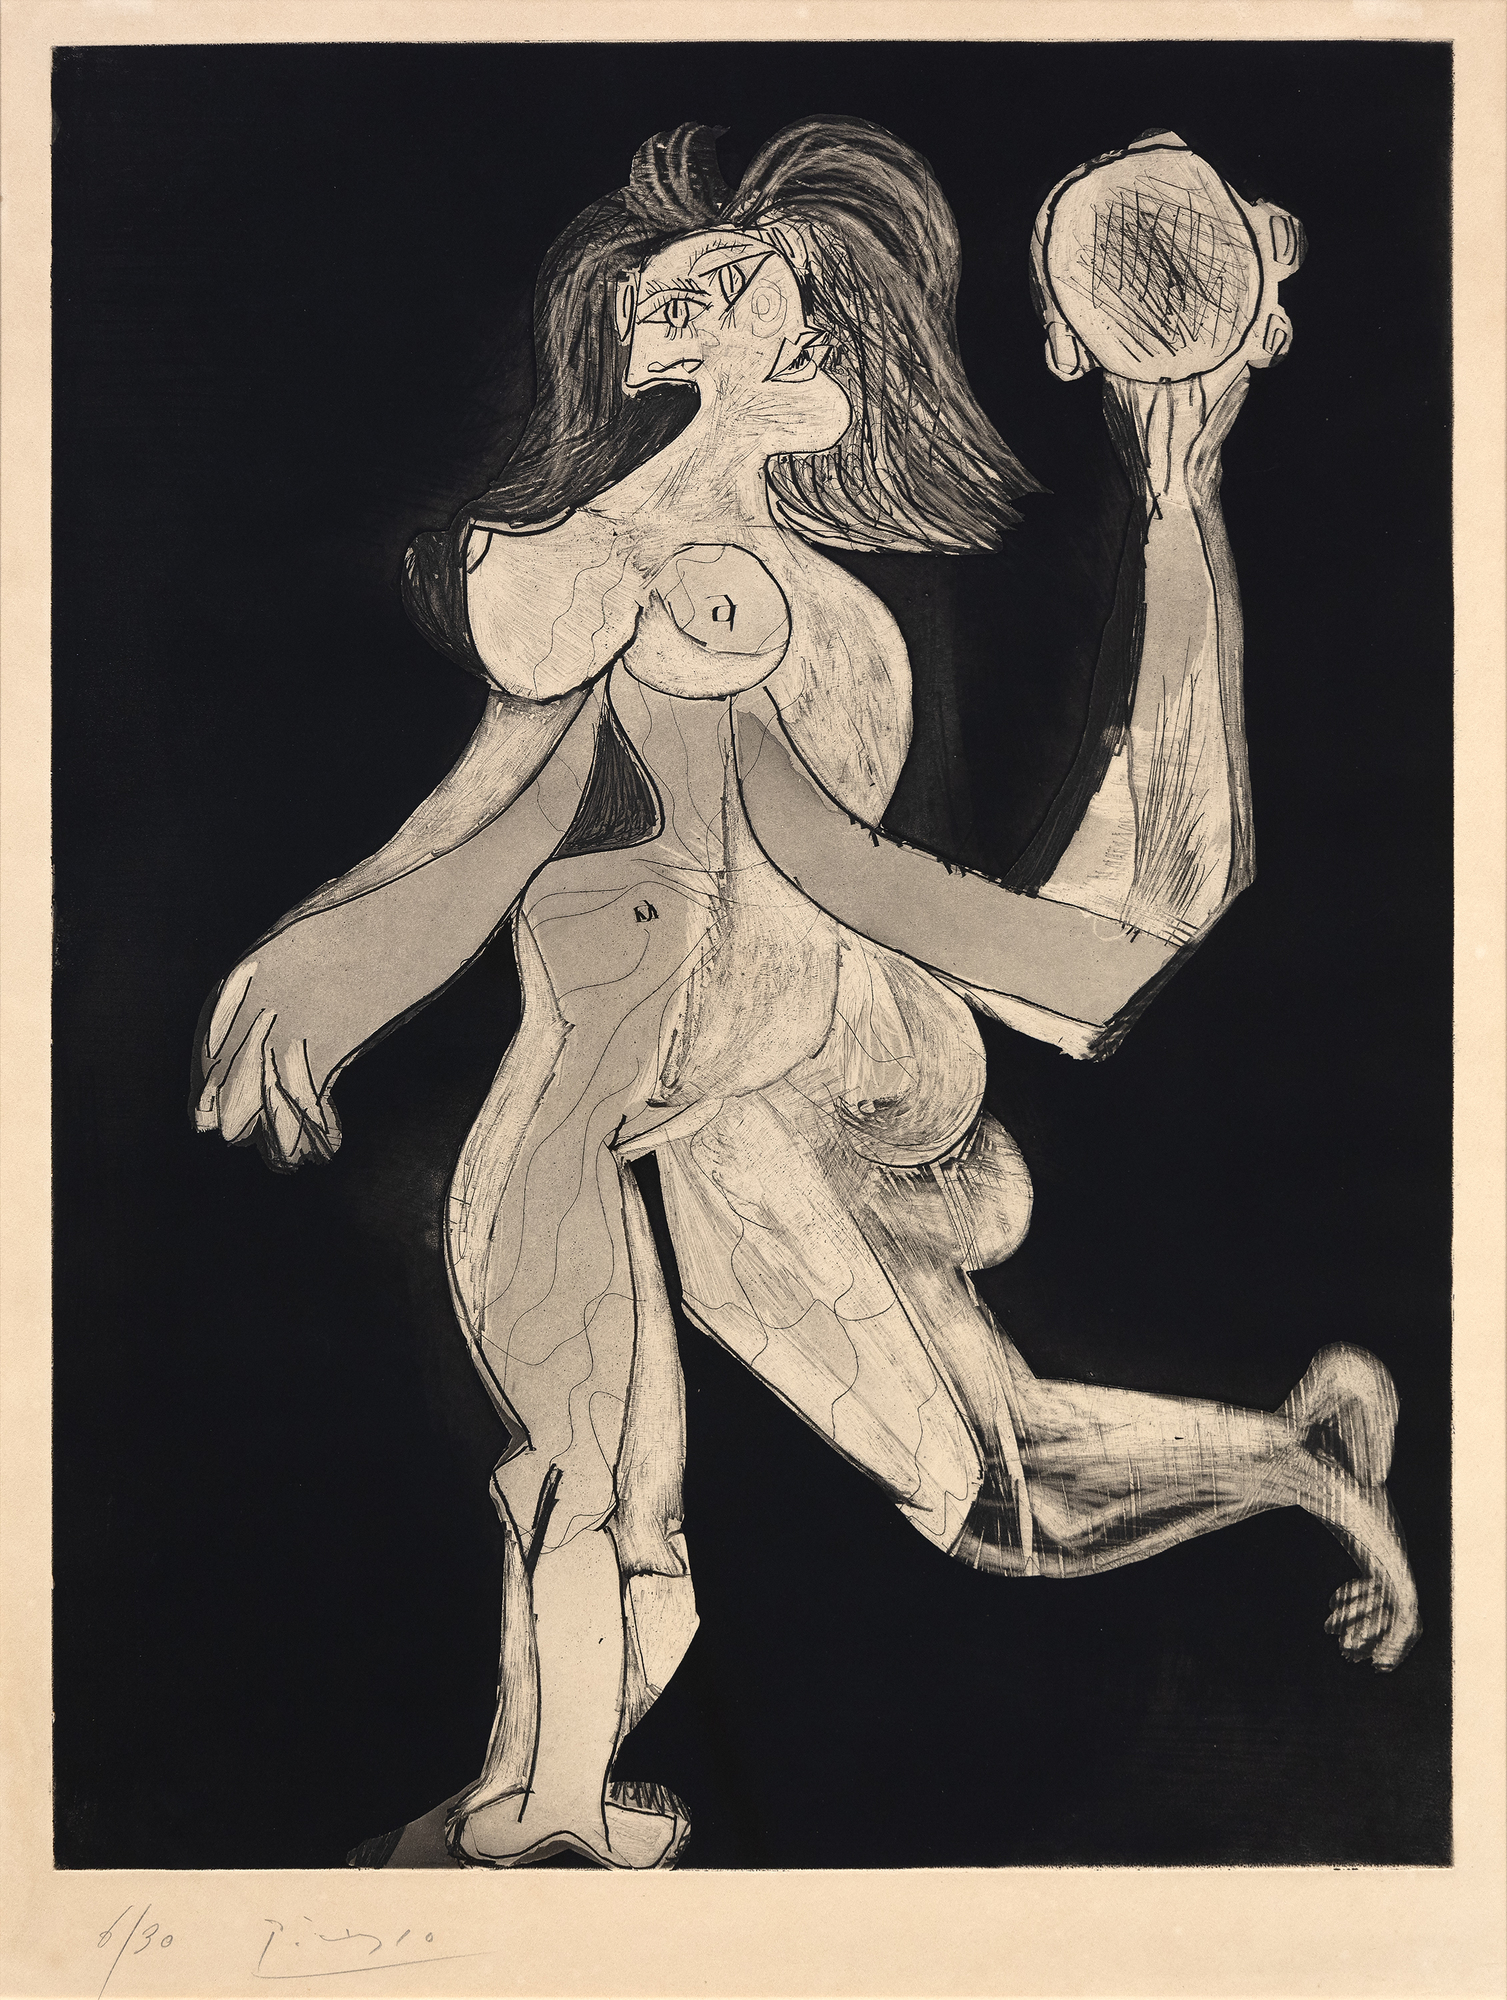 &quot;La femme au tambourin&quot; (1939) is one of Pablo Picasso’s greatest graphic works. Partially based on compositions by Degas and Poussin, the work exudes a strong Classical presence with a Modernist edge. Thought to be a depiction of Dora Maar, Picasso’s lover at the time, the print is highly coveted by institutional and private collectors. One impression from this edition is included in the permanent collection of the Museum of Modern Art, New York, and another is included in the National Gallery of Art, Washington, D.C.&lt;br&gt;&lt;br&gt;Picasso’s experimentations in printmaking began in the first decade of the 20th century and engaged him for many decades, into the 1970s. In this time, Picasso embraced multiple methods of printmaking, including lithography, etching, aquatint, and linoleum block printing. His earliest prints were, like the present work, intaglio. With La femme au tambourin, Picasso incorporated the additional medium of aquatint, which yielded a watercolor-like effect throughout the composition and an extreme range of tonal qualities. This technique in particular afforded opportunities for expression that could not be found in painting. For his experimental reach and depth of mastery, Picasso’s corpus of graphic work is among the most highly respected and coveted in the history of art, rivaling that of Rembrandt.